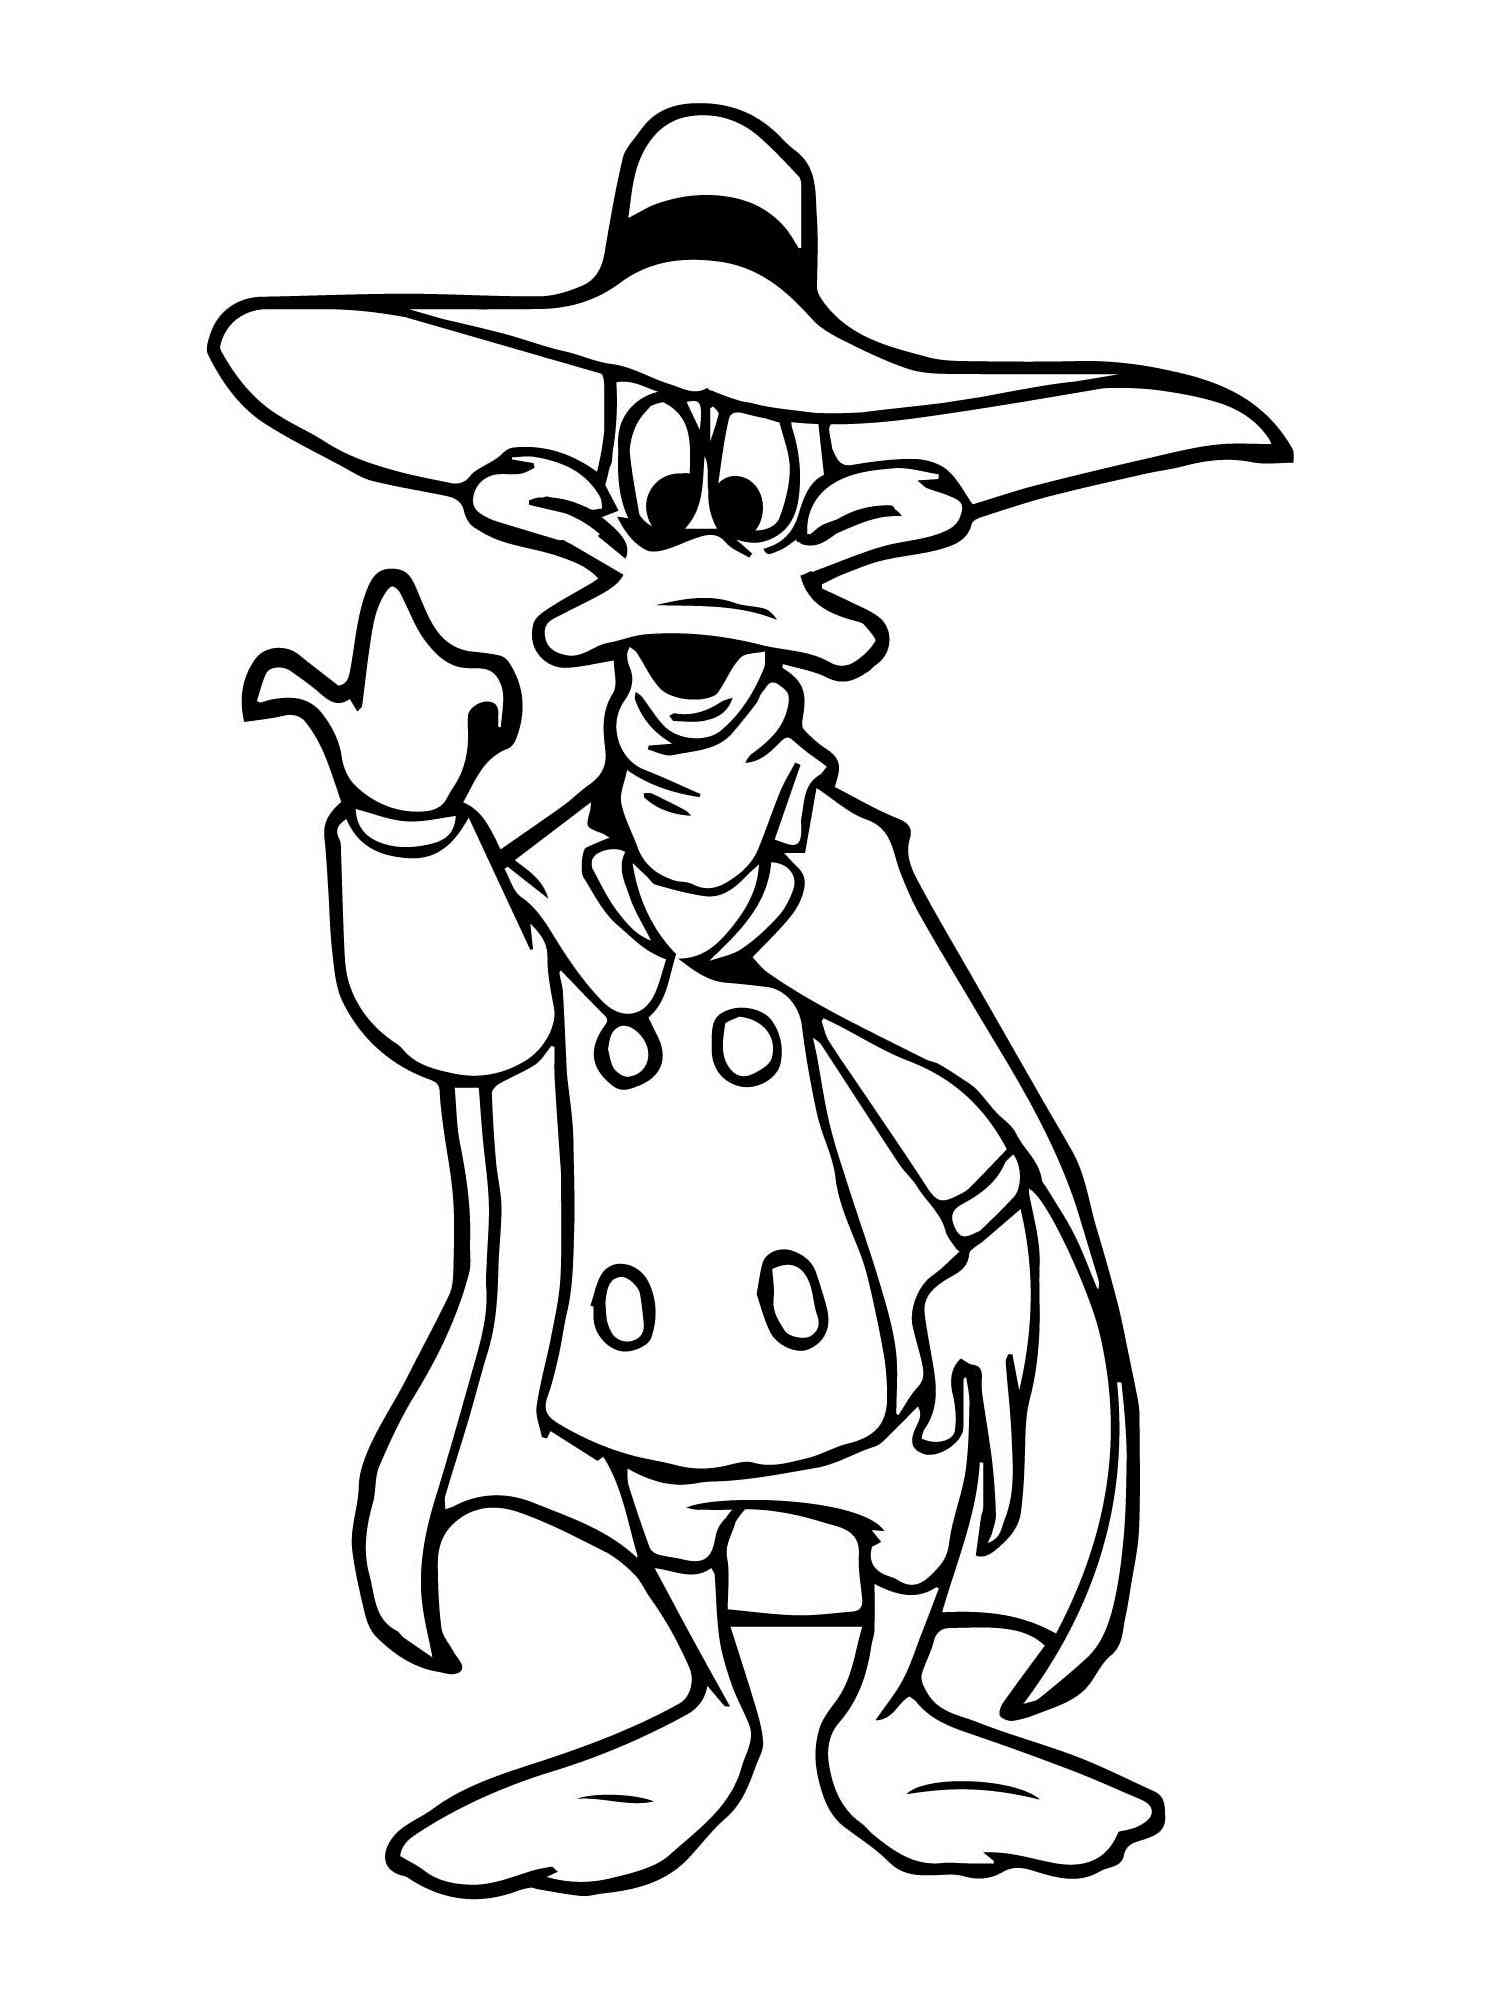 Darkwing Duck 3 coloring page